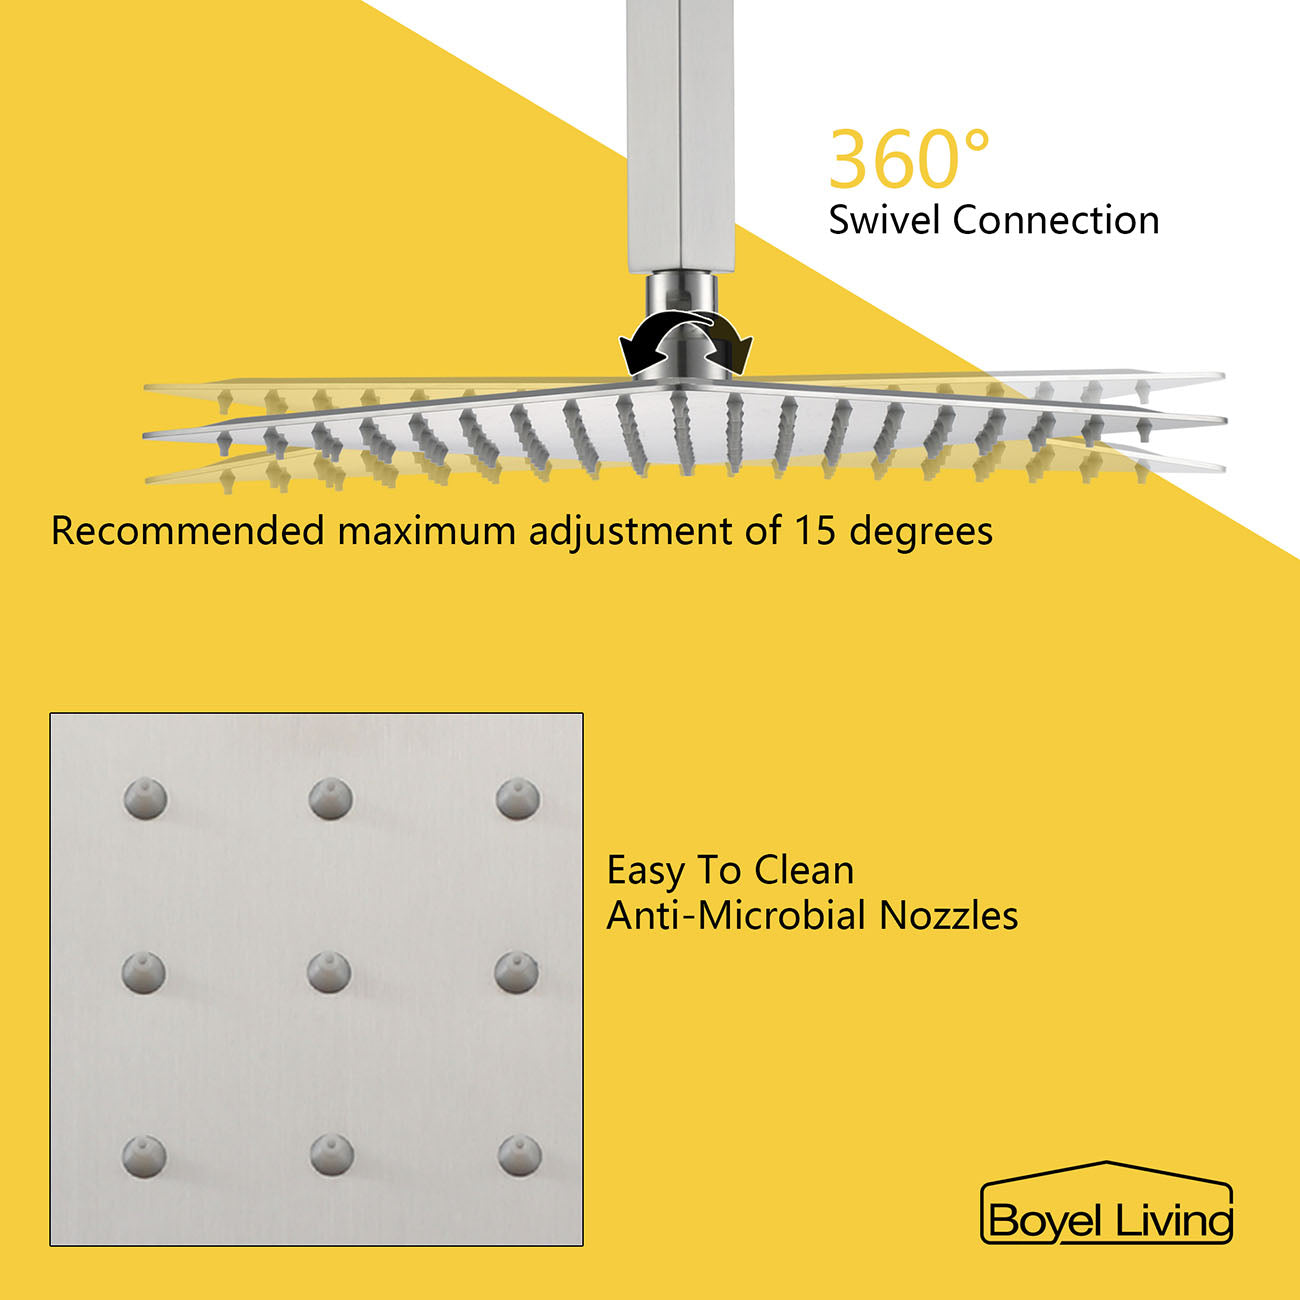 Large Square Rain Shower Head with Anti-Microbial Nozzles in Brushed Nickel